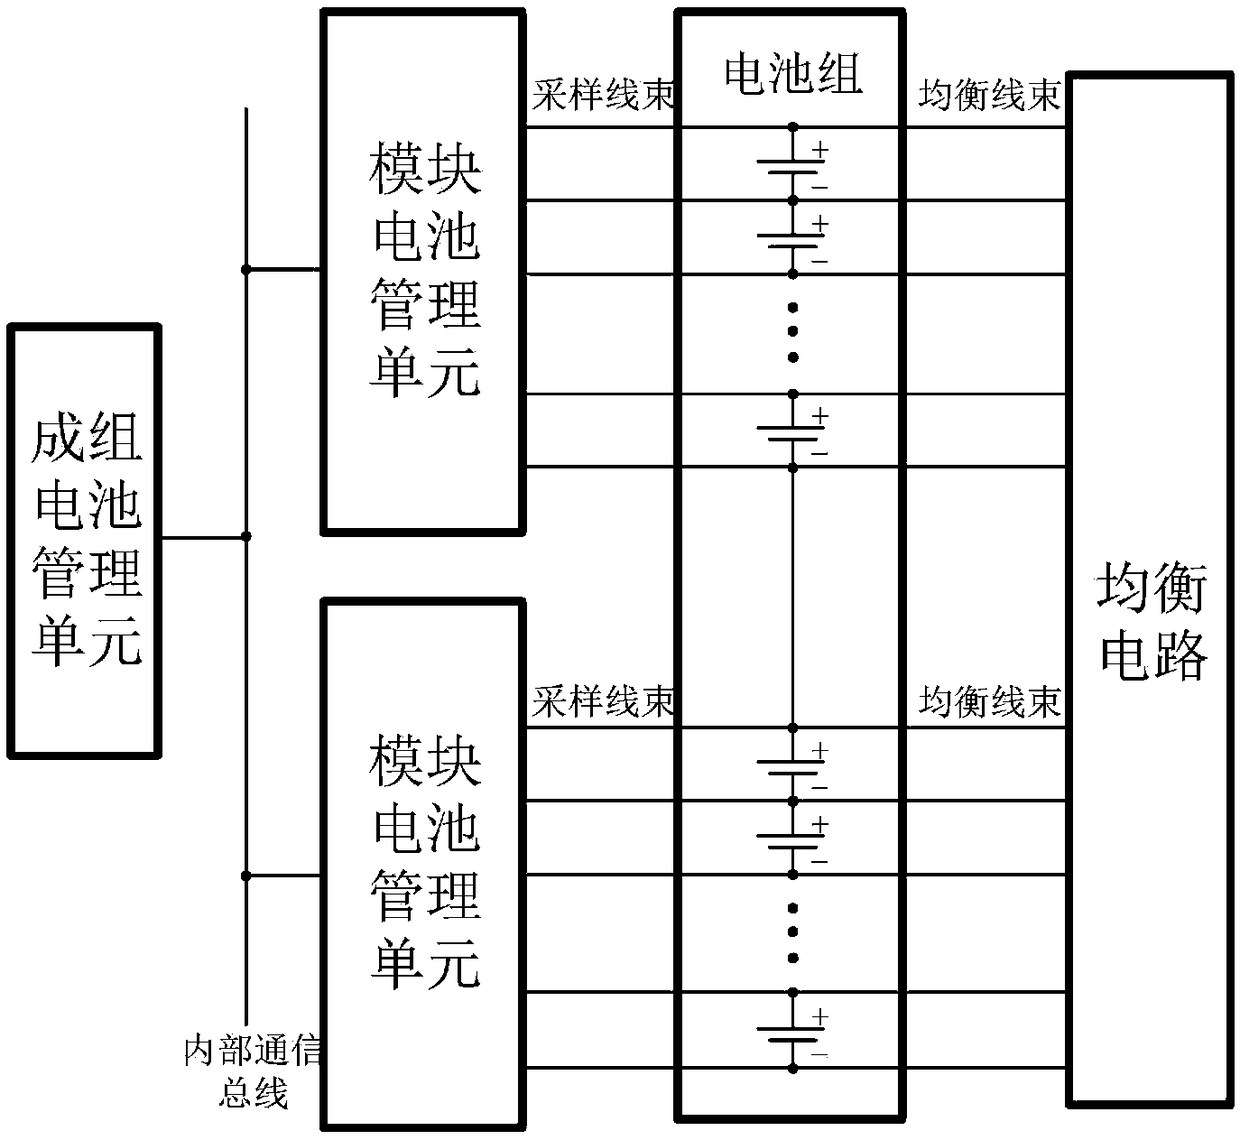 A lithium battery management system integrating information collection, data communication, and power balance functions